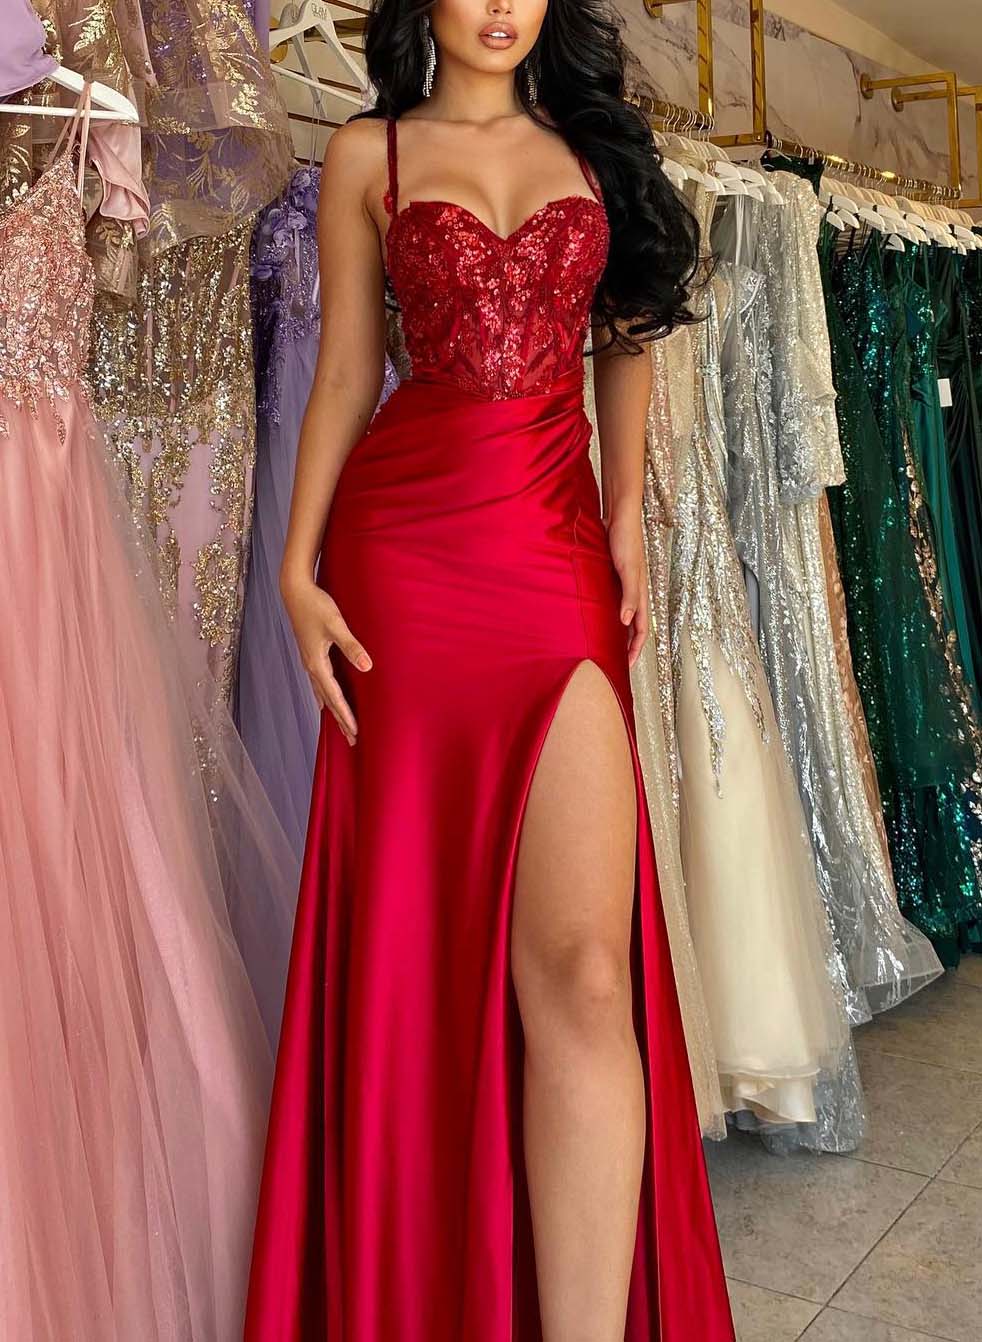 Sparkly Lace Sheath/Column Sweetheart Prom Dresses With Back Hole